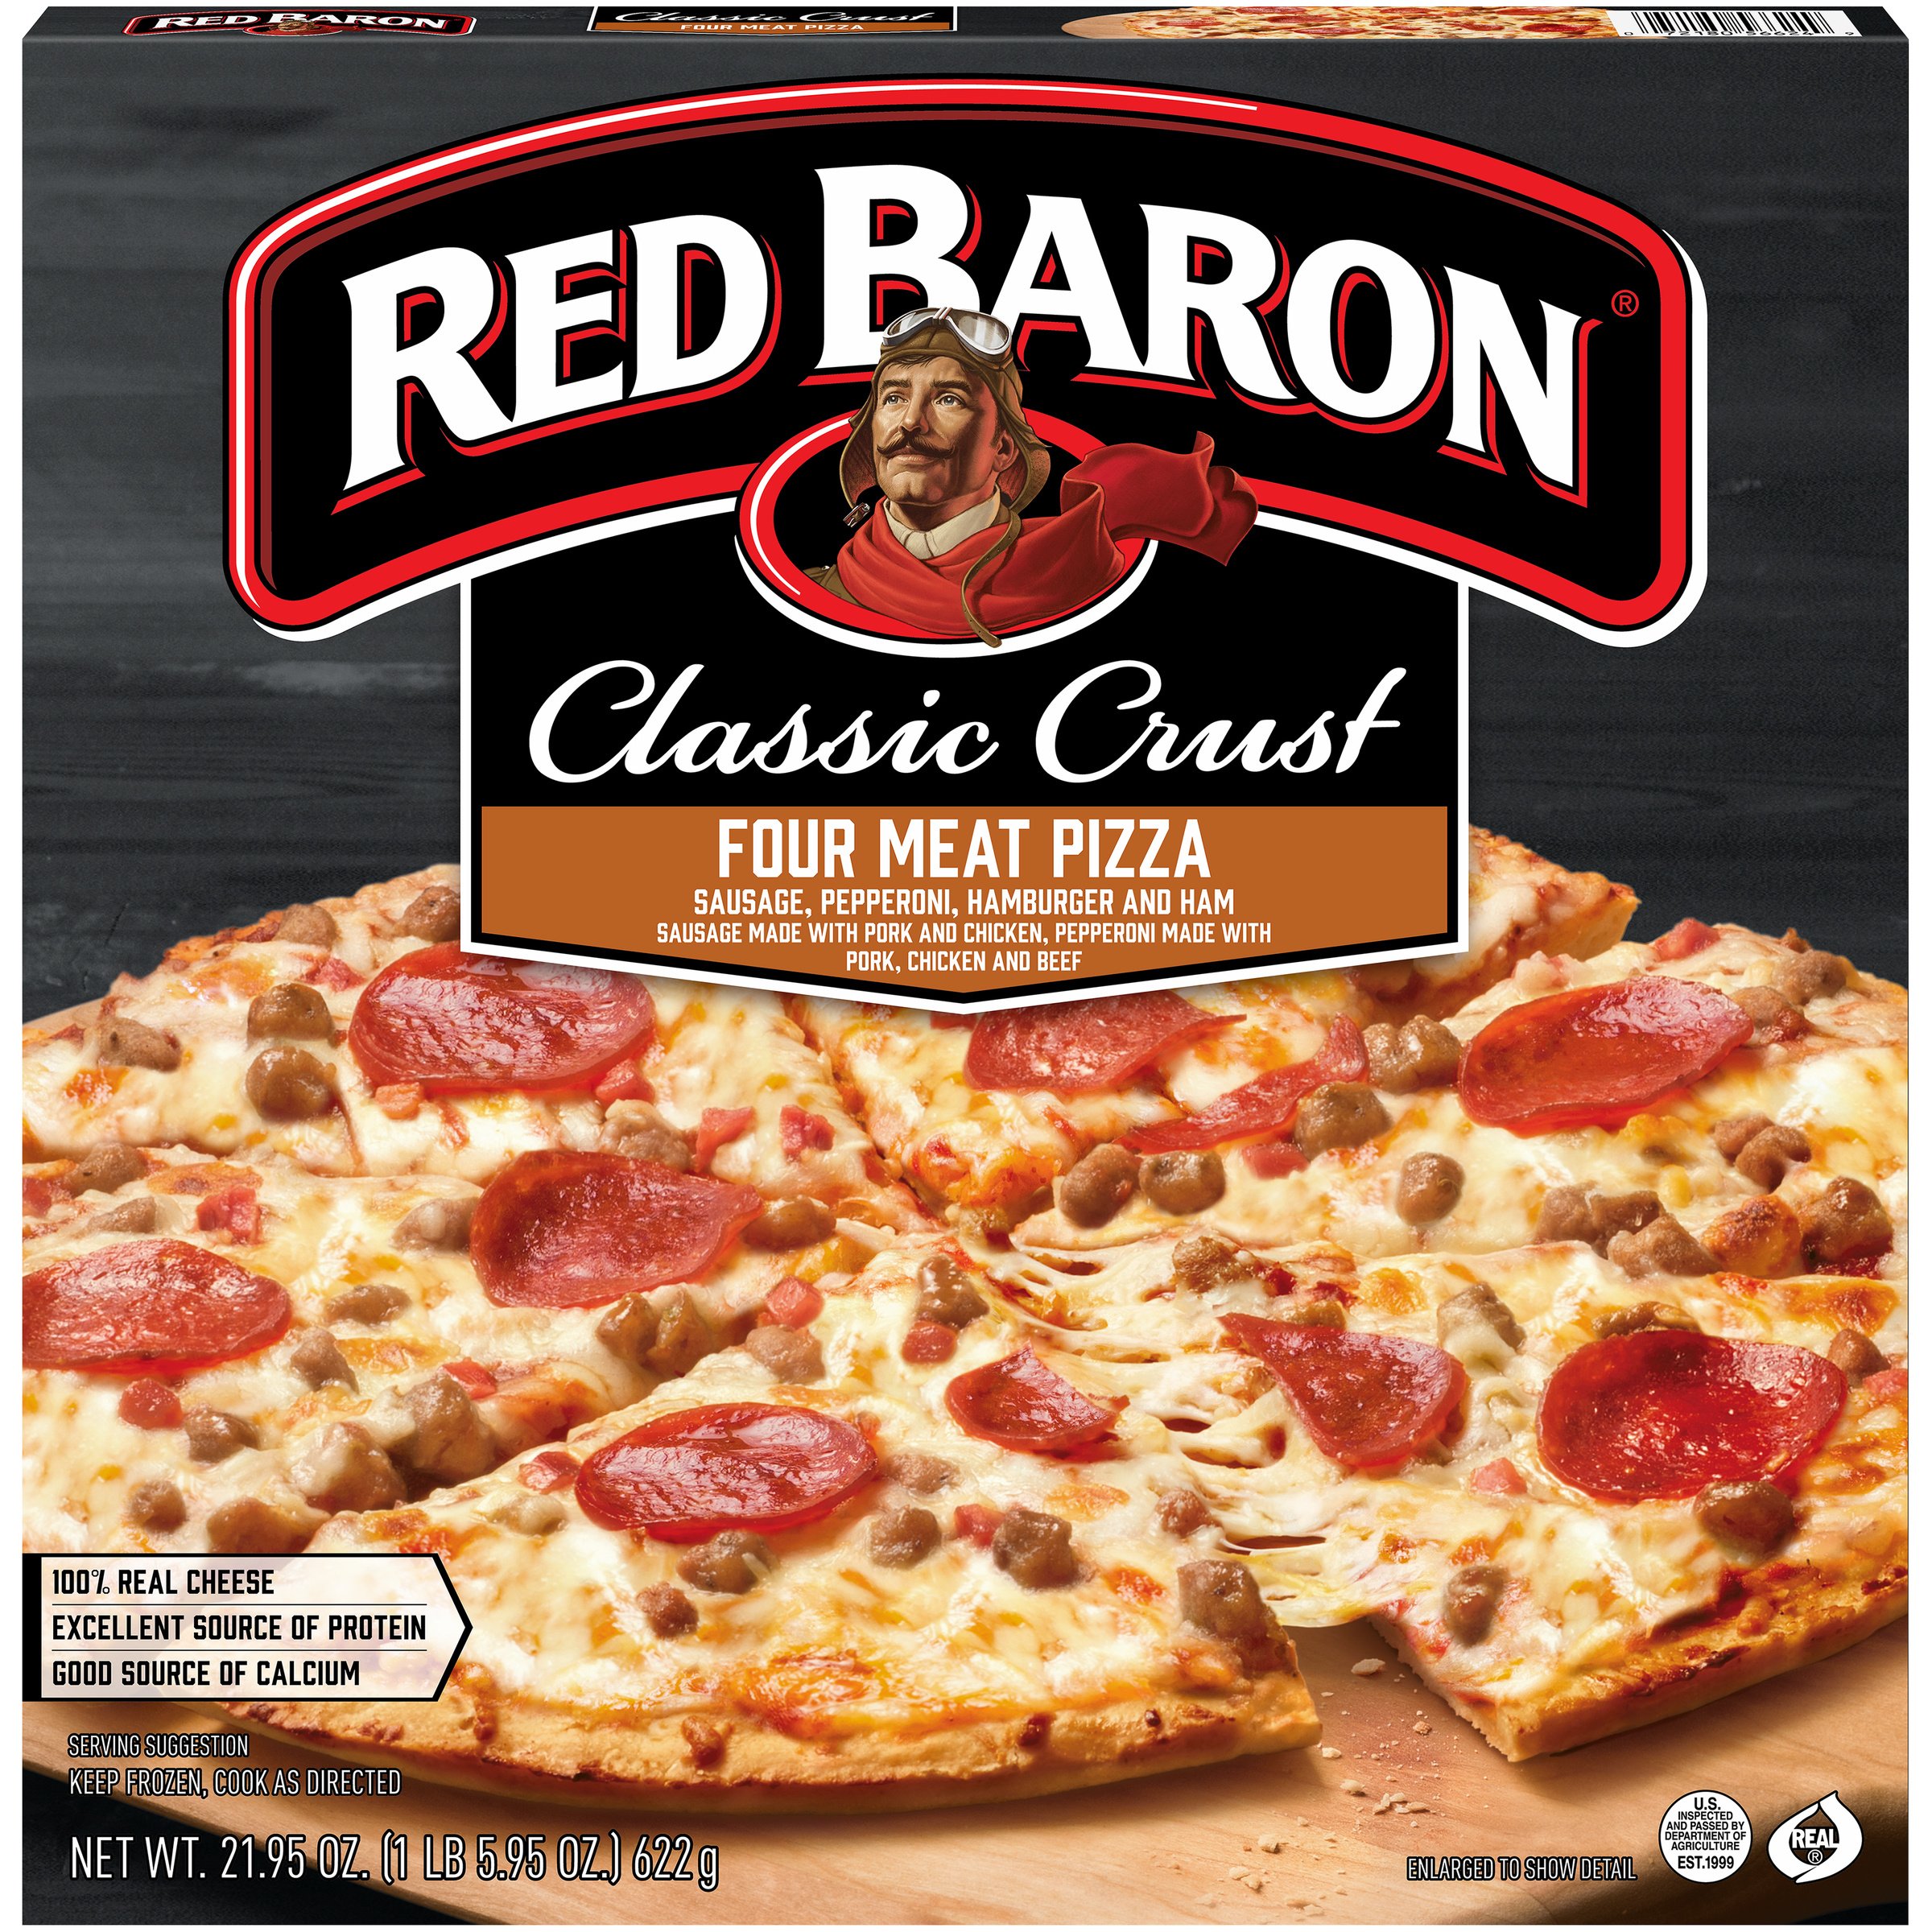 Red Baron, Pizza, Classic Crust Four Meat, 21.95 oz (Frozen